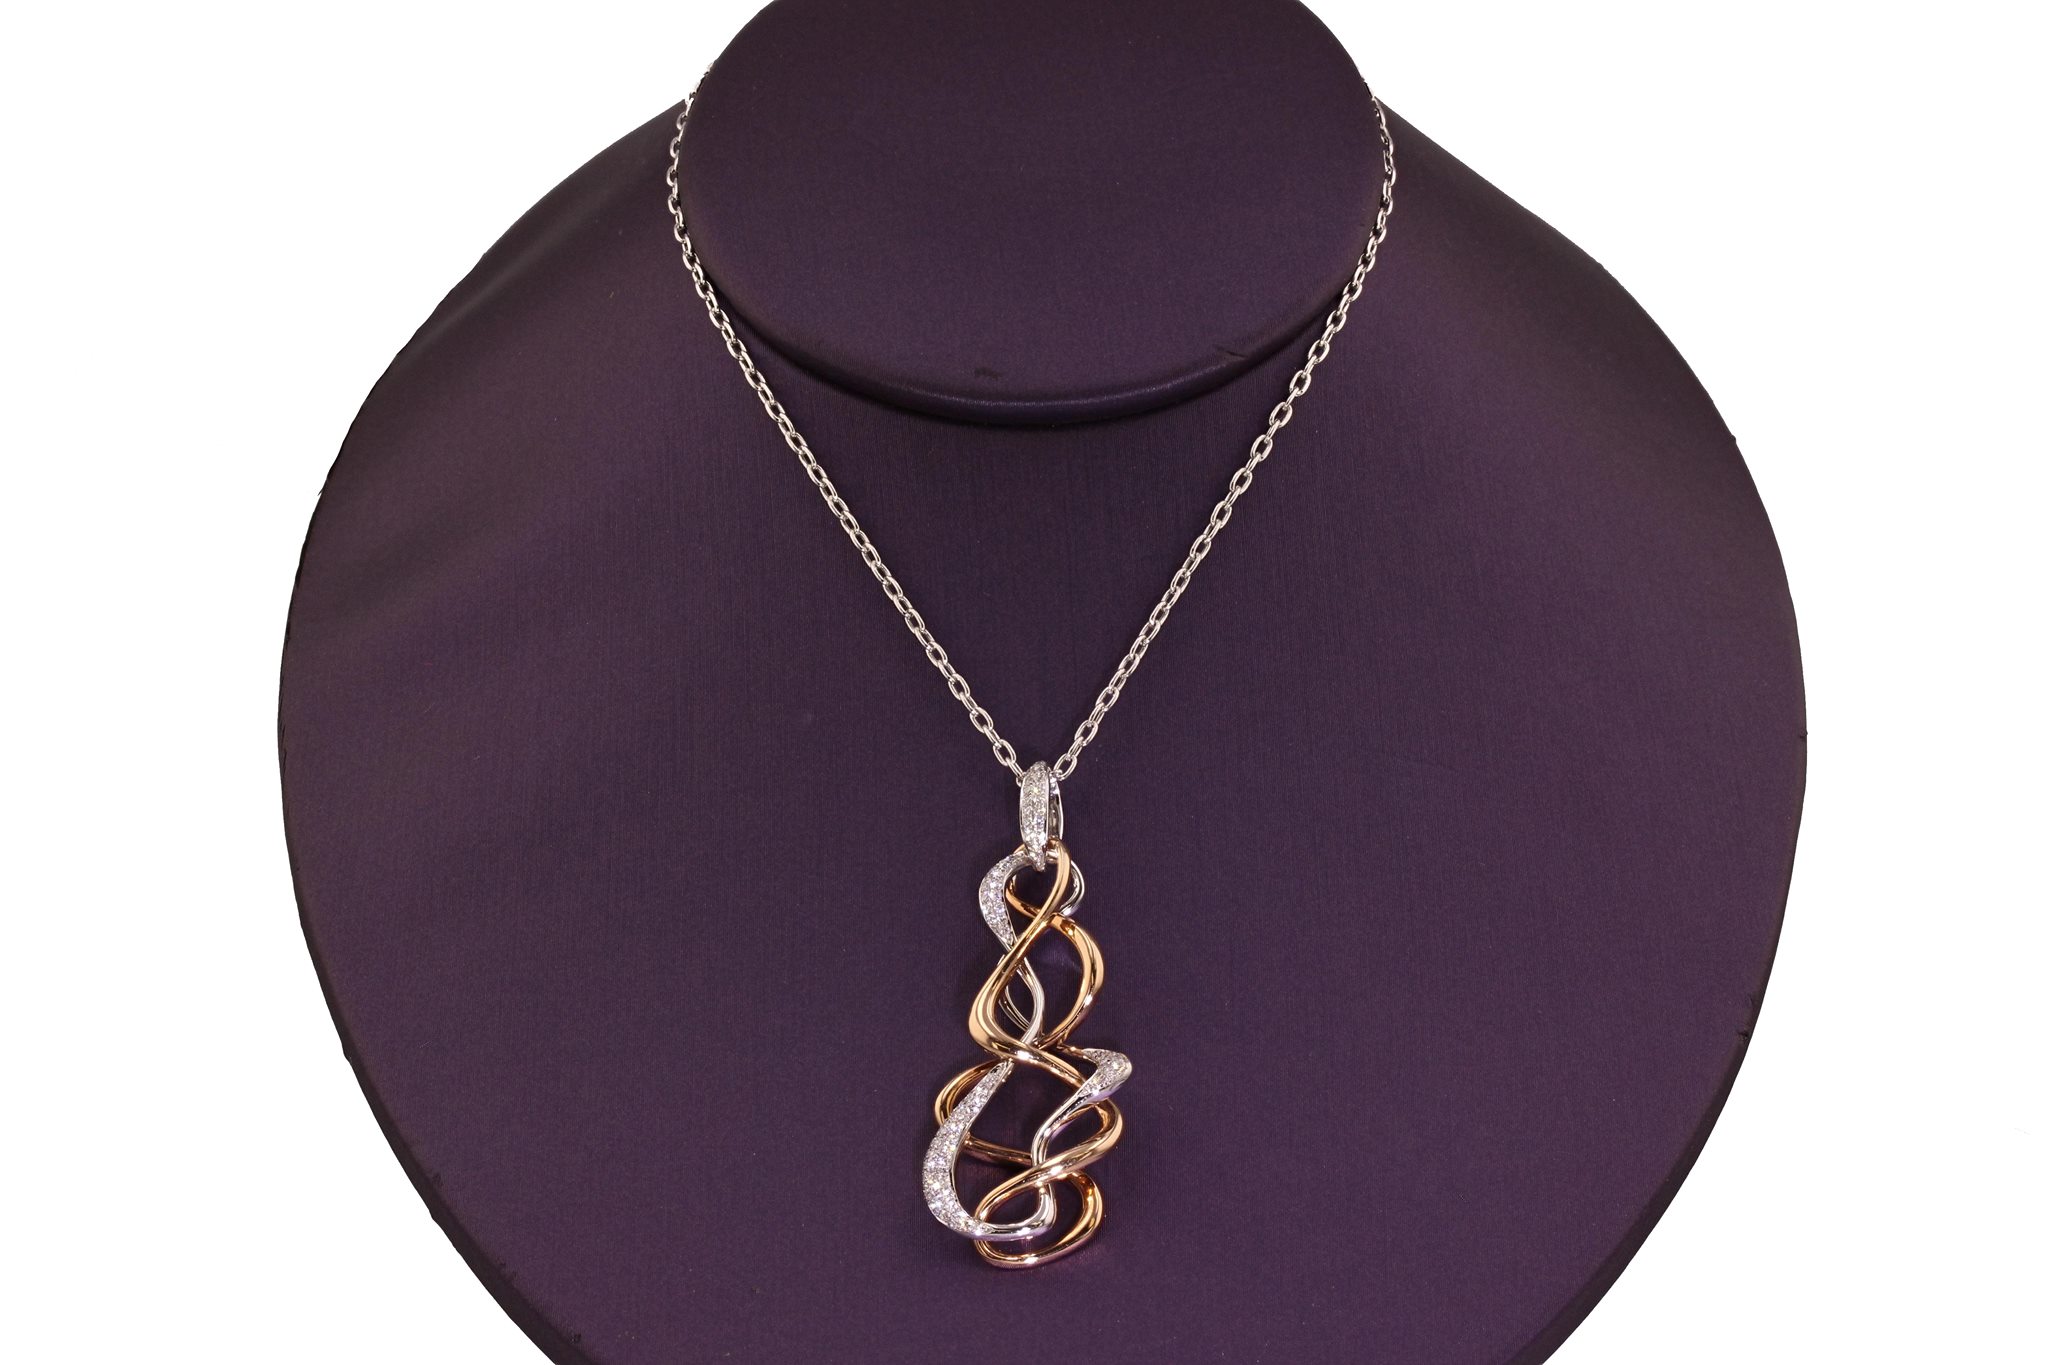 18kt White and Rose Gold two-piece Diamond Pavé "Double Twist" Pendant and Chain. 0.30 ctw. $3900